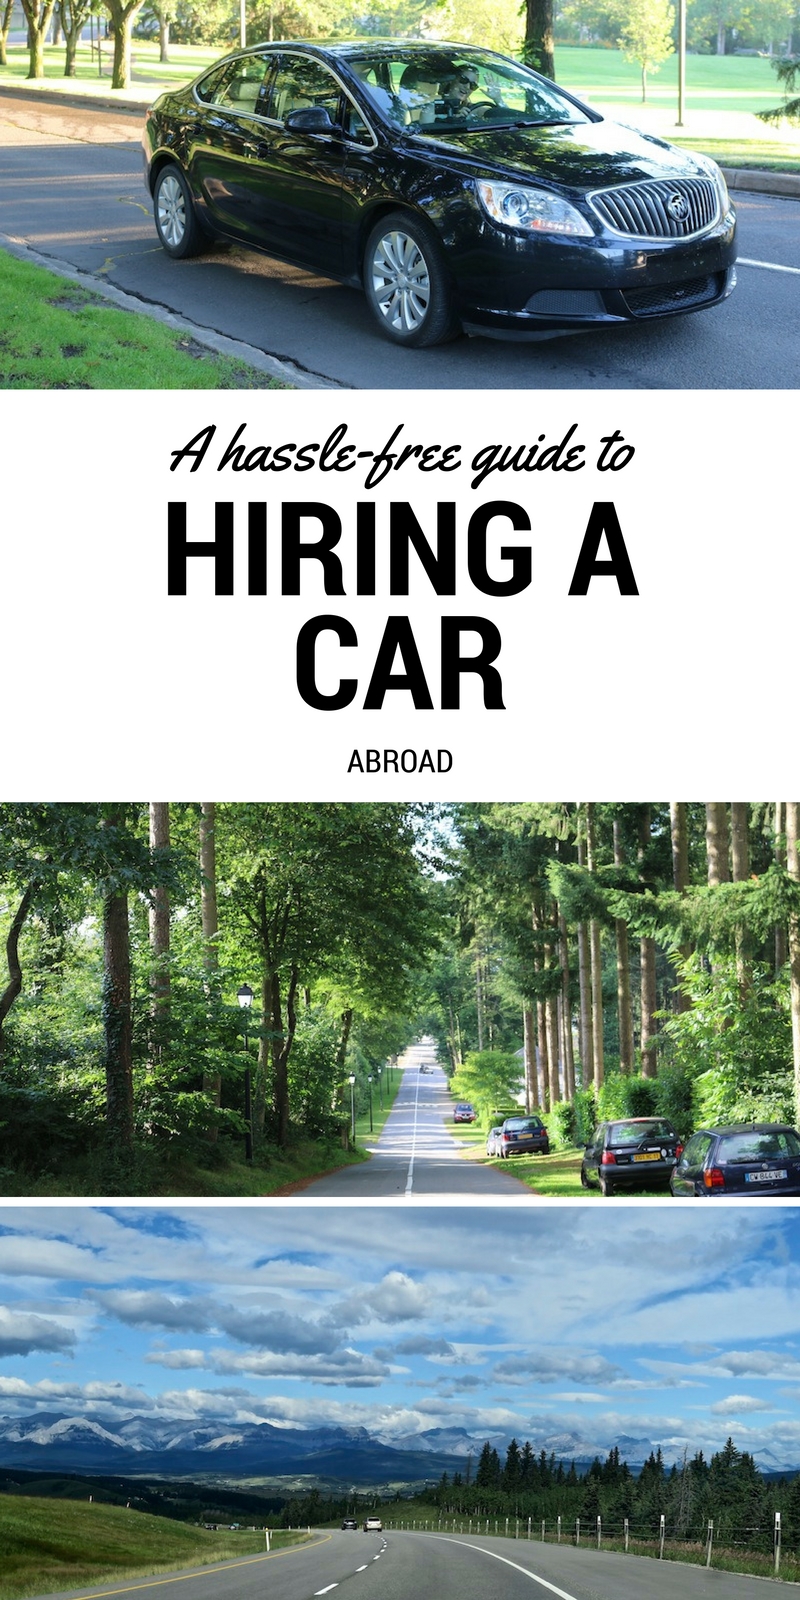 A hassle-free guide to hiring a car abroad on The Travel Hack travel blog